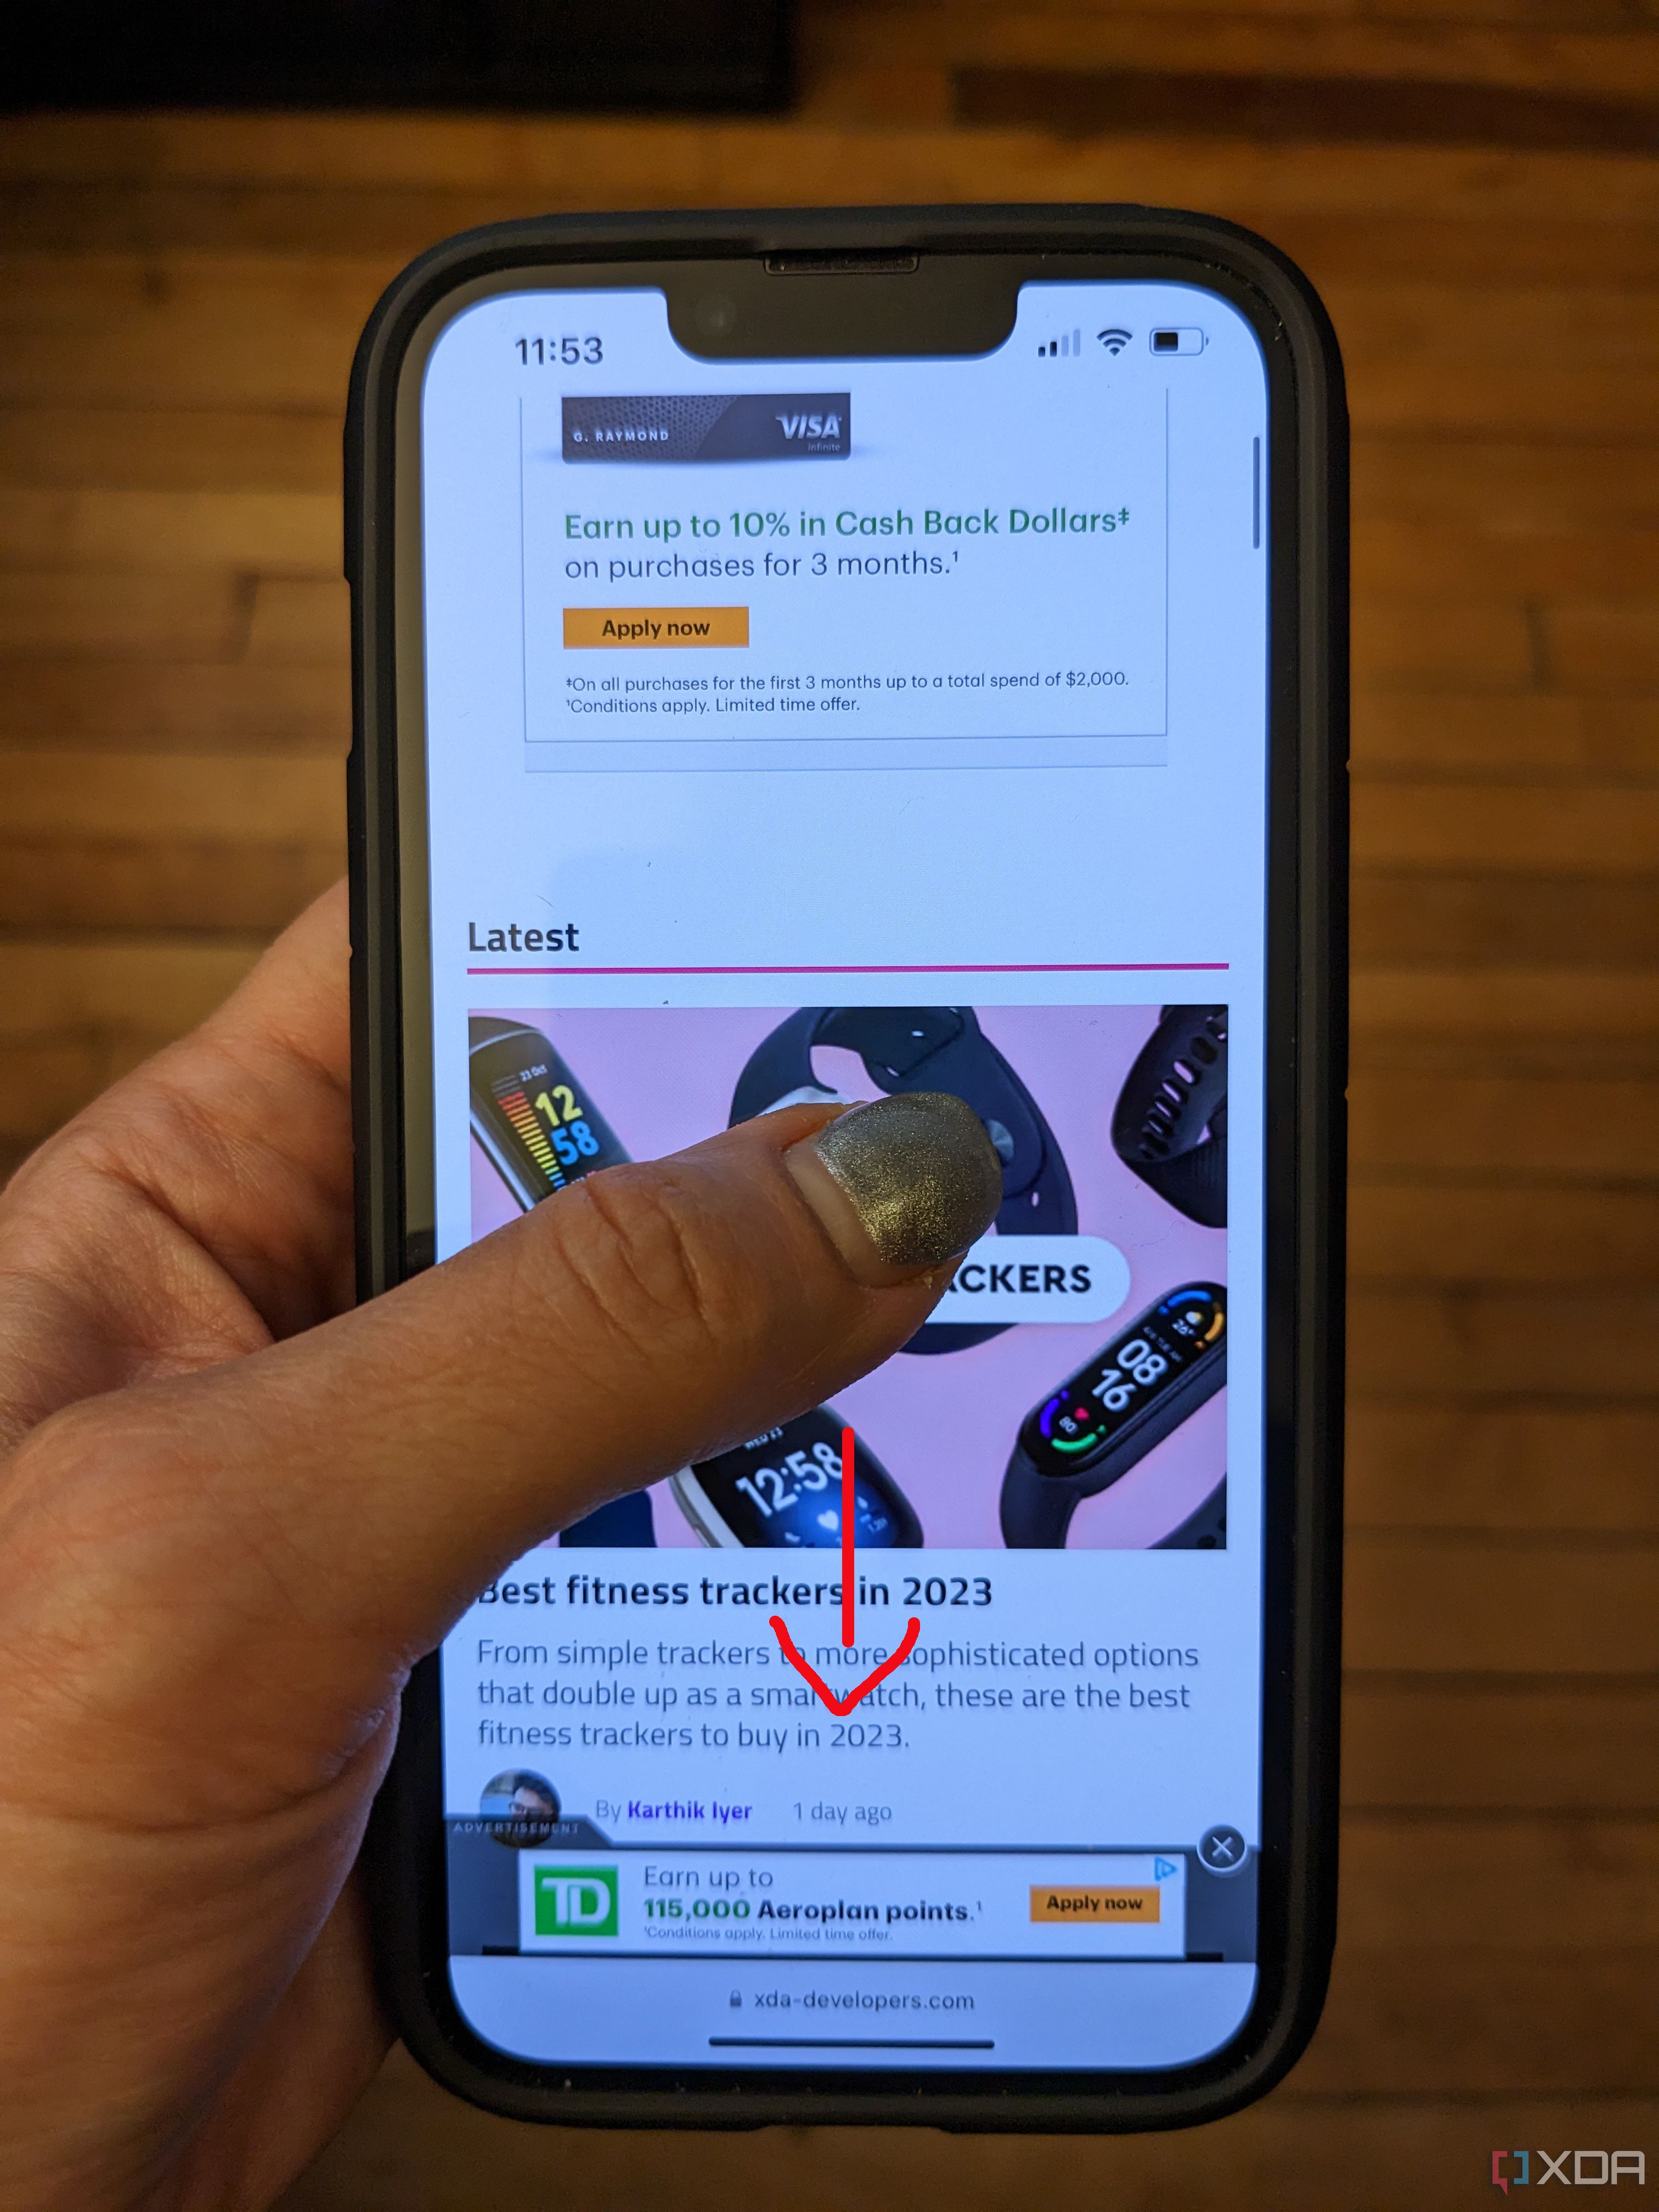 Basic iphone gestures scroll down